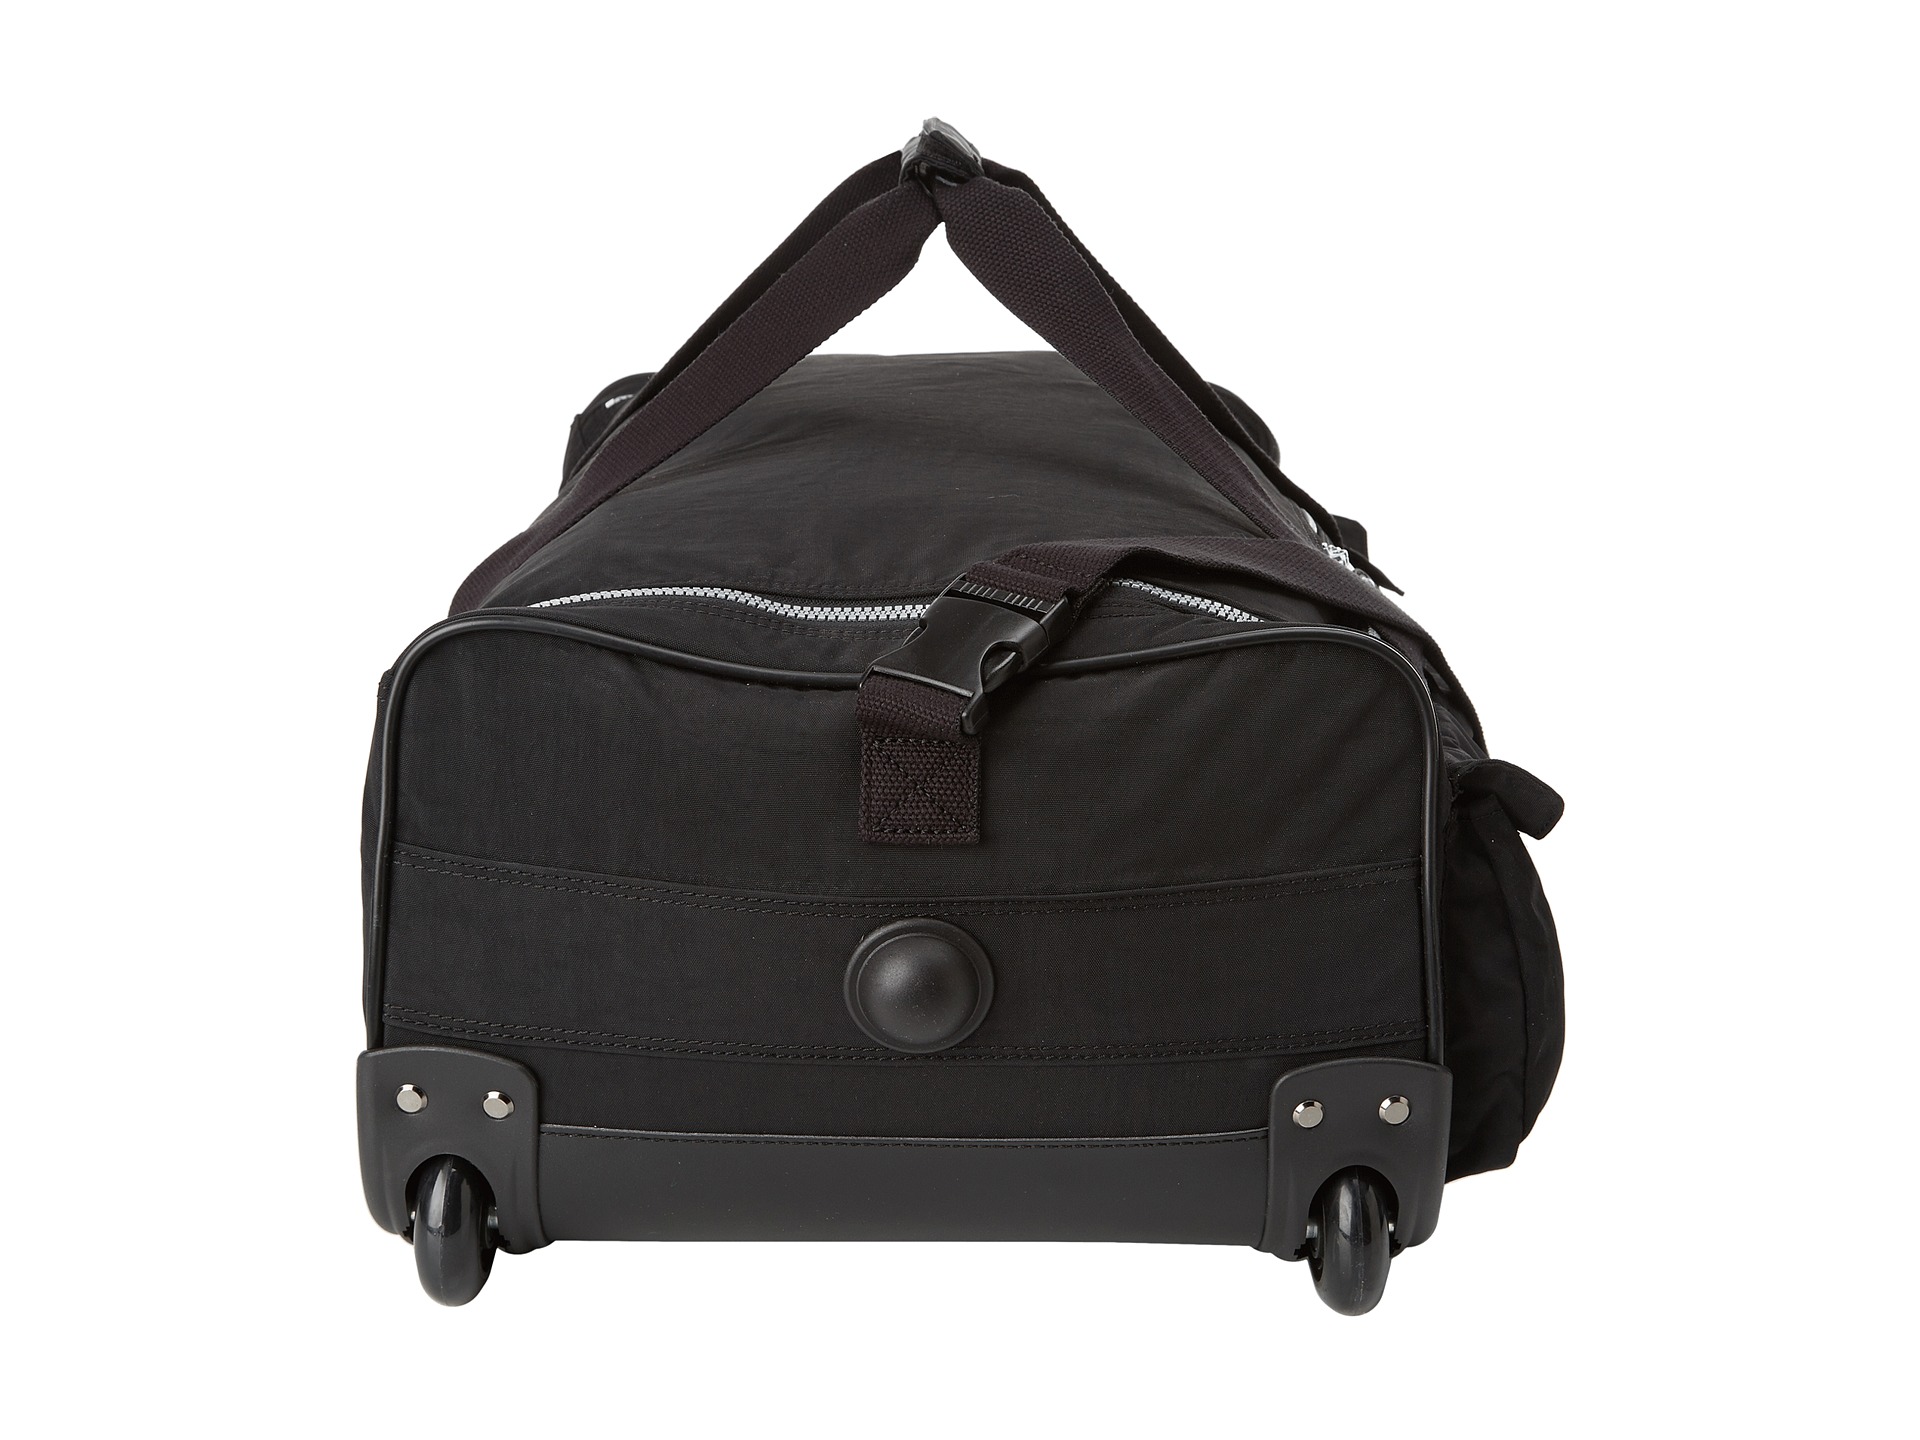 Kipling Discover Small Wheeled Luggage Duffle at www.bagssaleusa.com